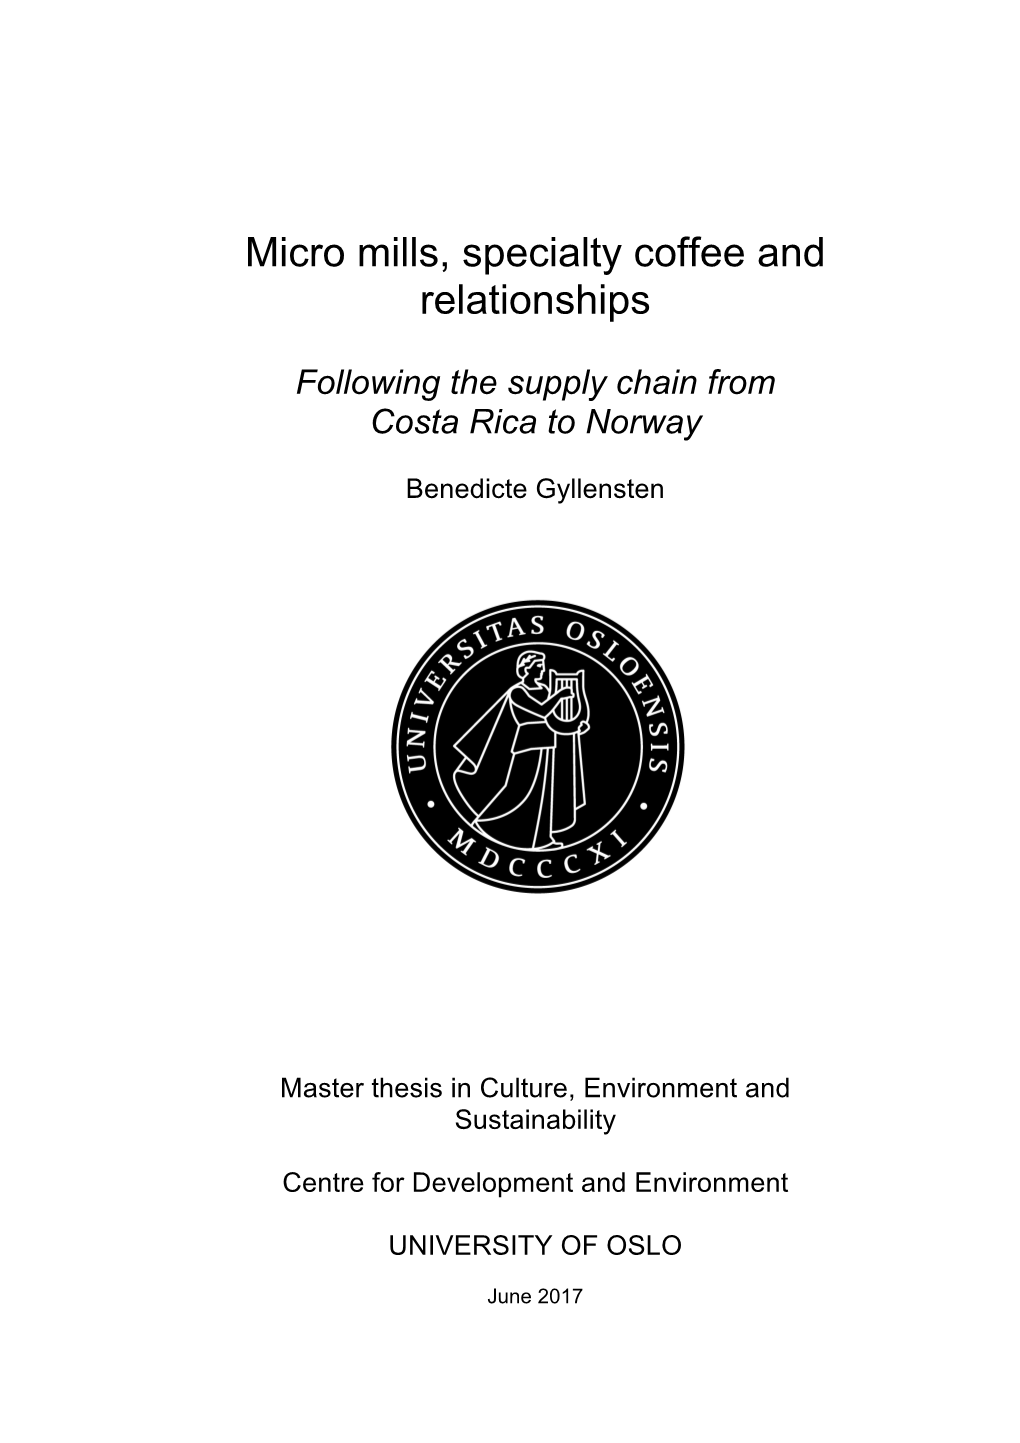 Micro Mills, Specialty Coffee and Relationships